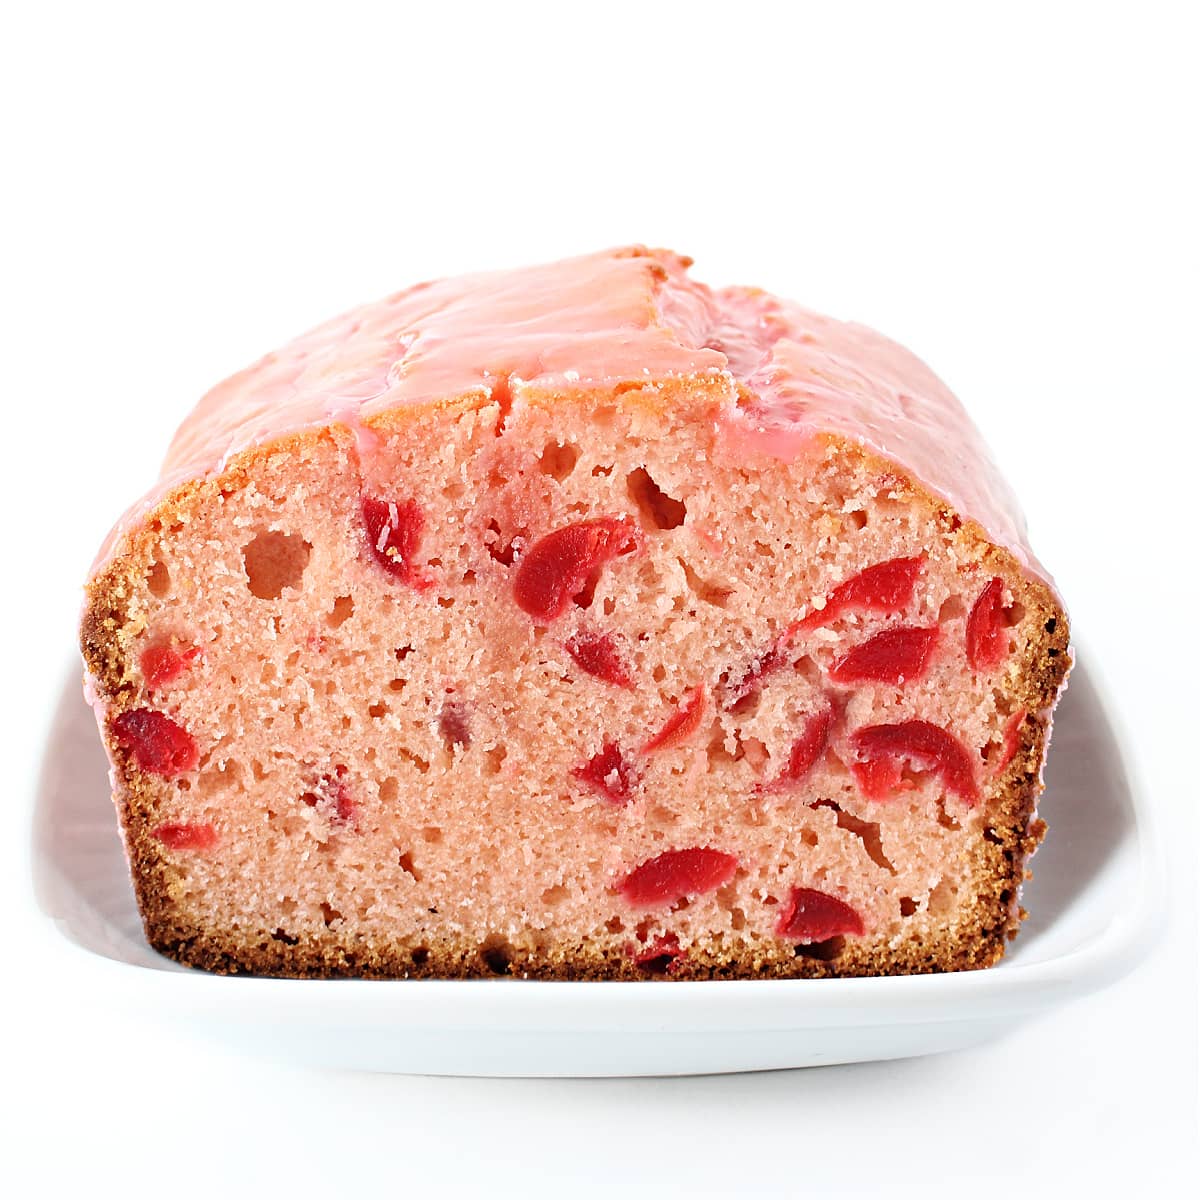 Cherry loaf with a slice removed to show interior pink cake with cherry bits.